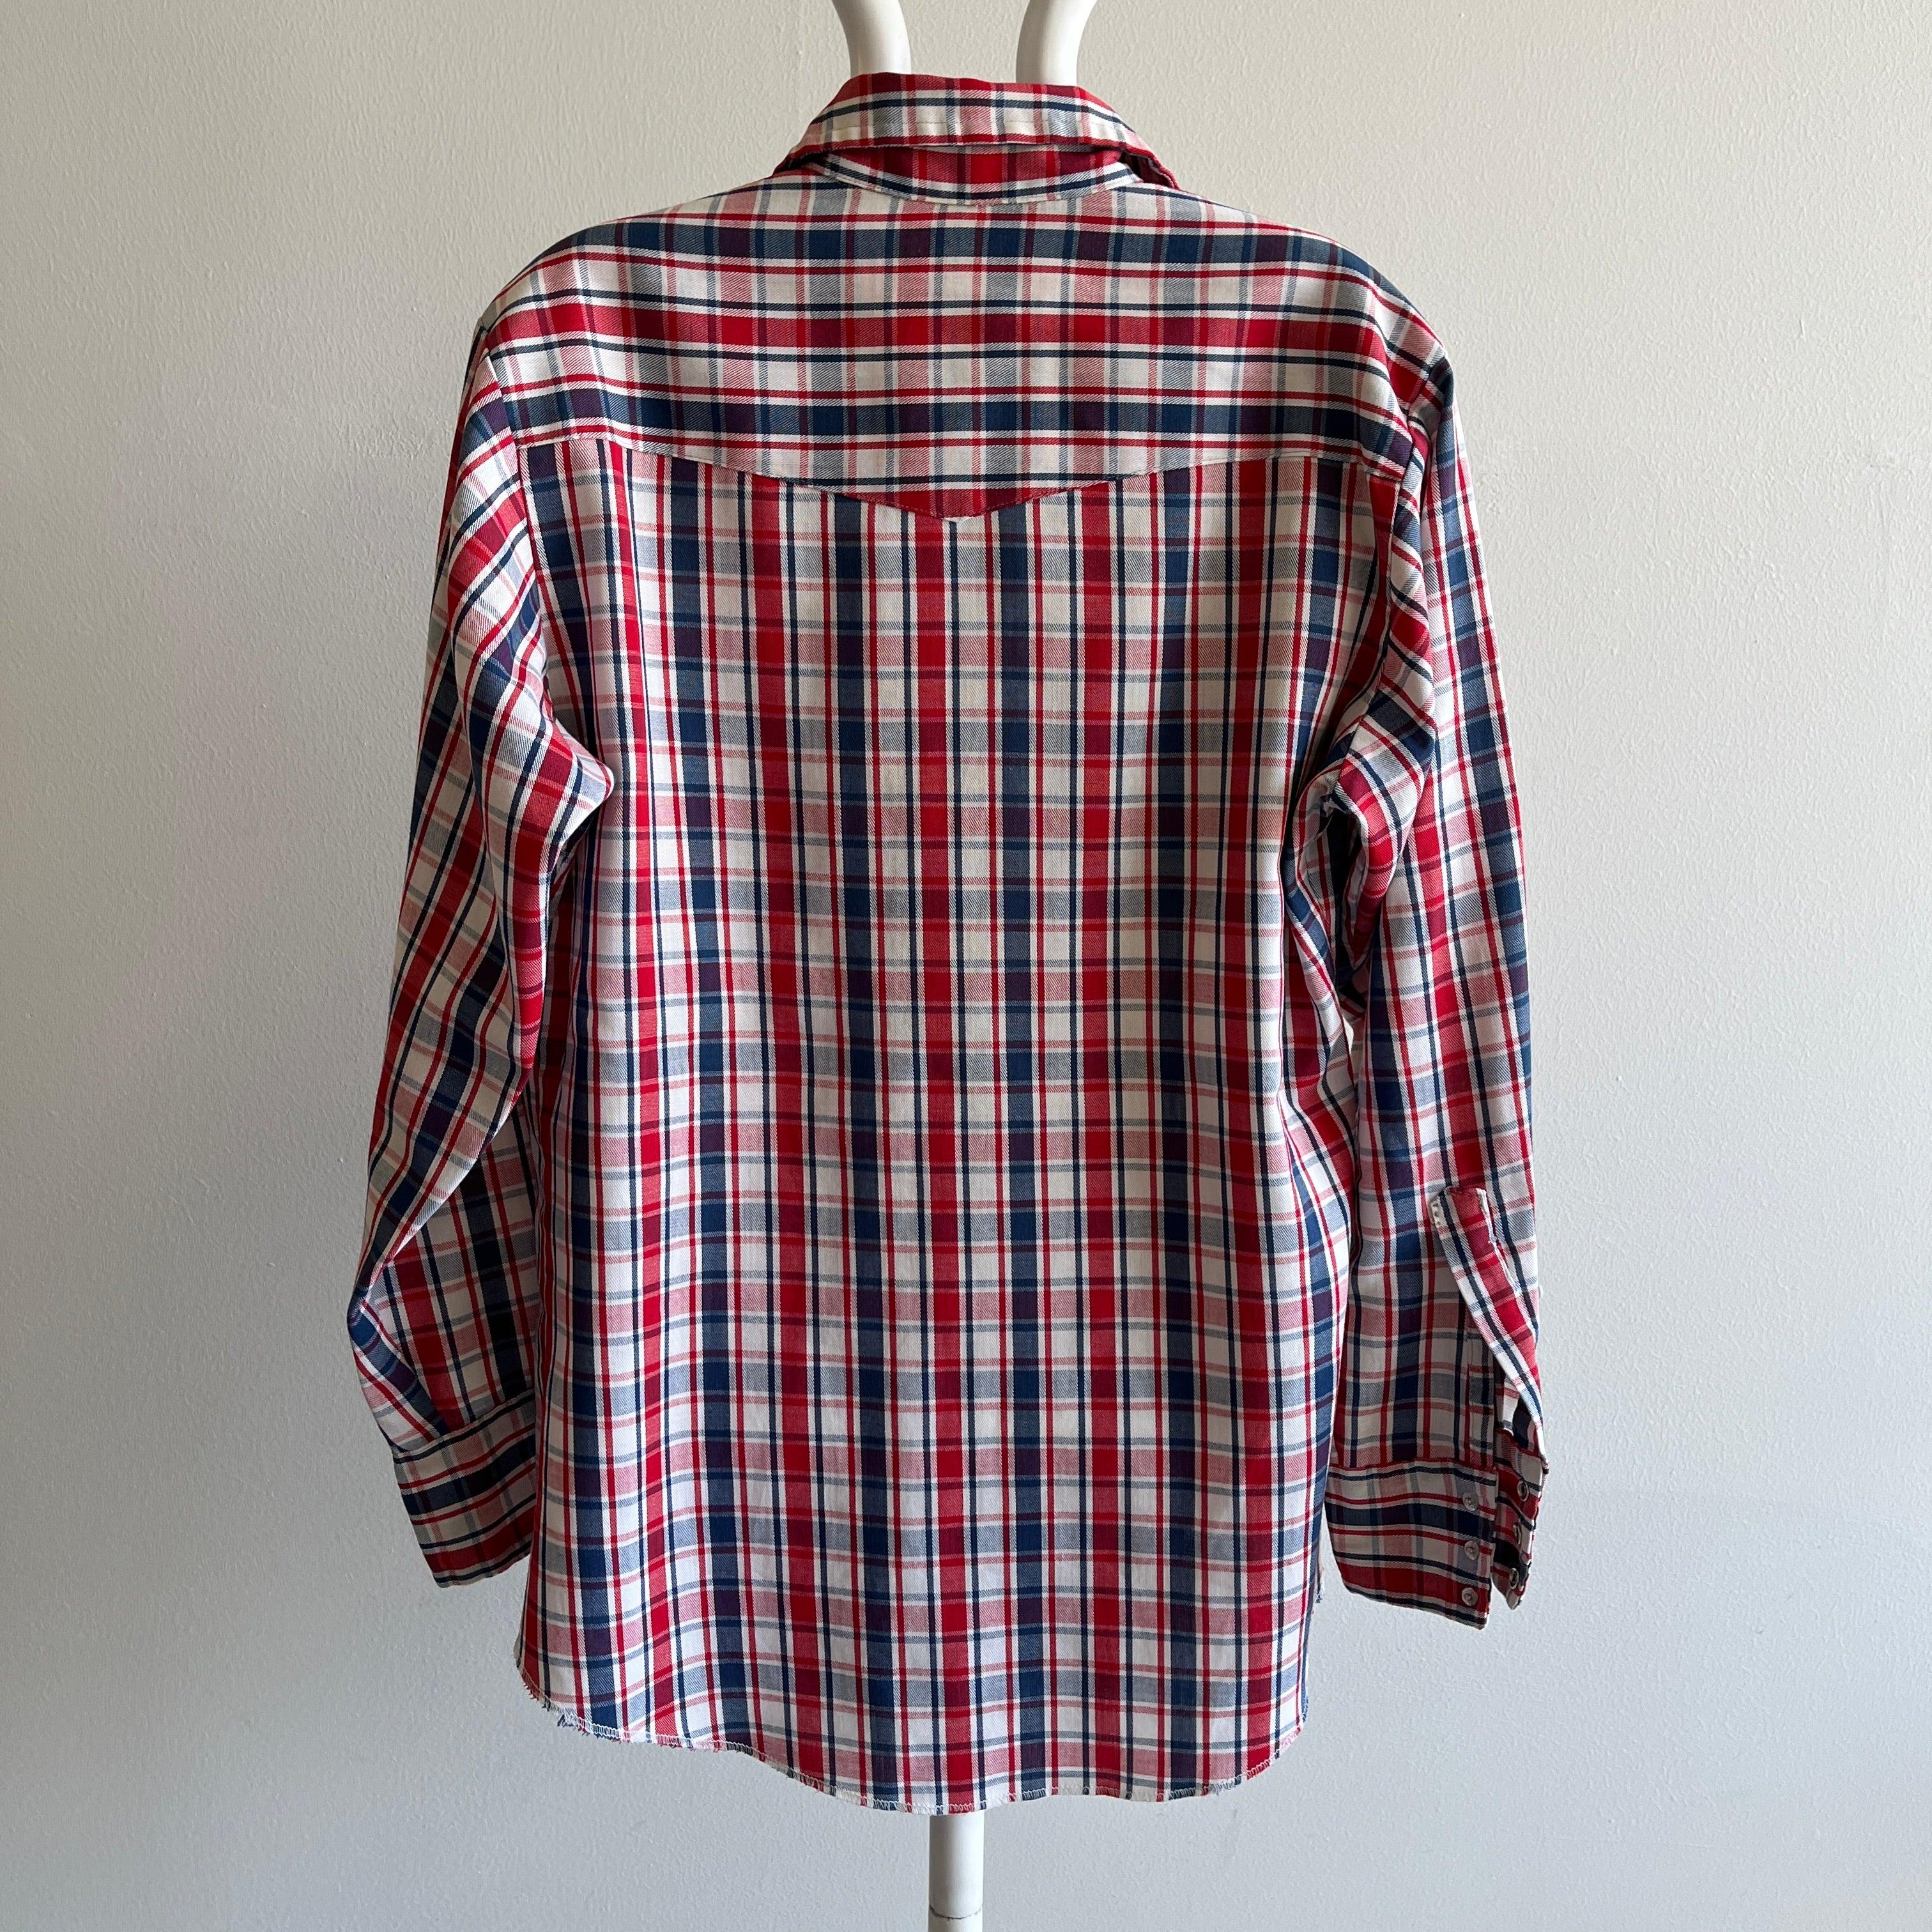 1970s Red White and Blue Cowboy Snap Front Shirt